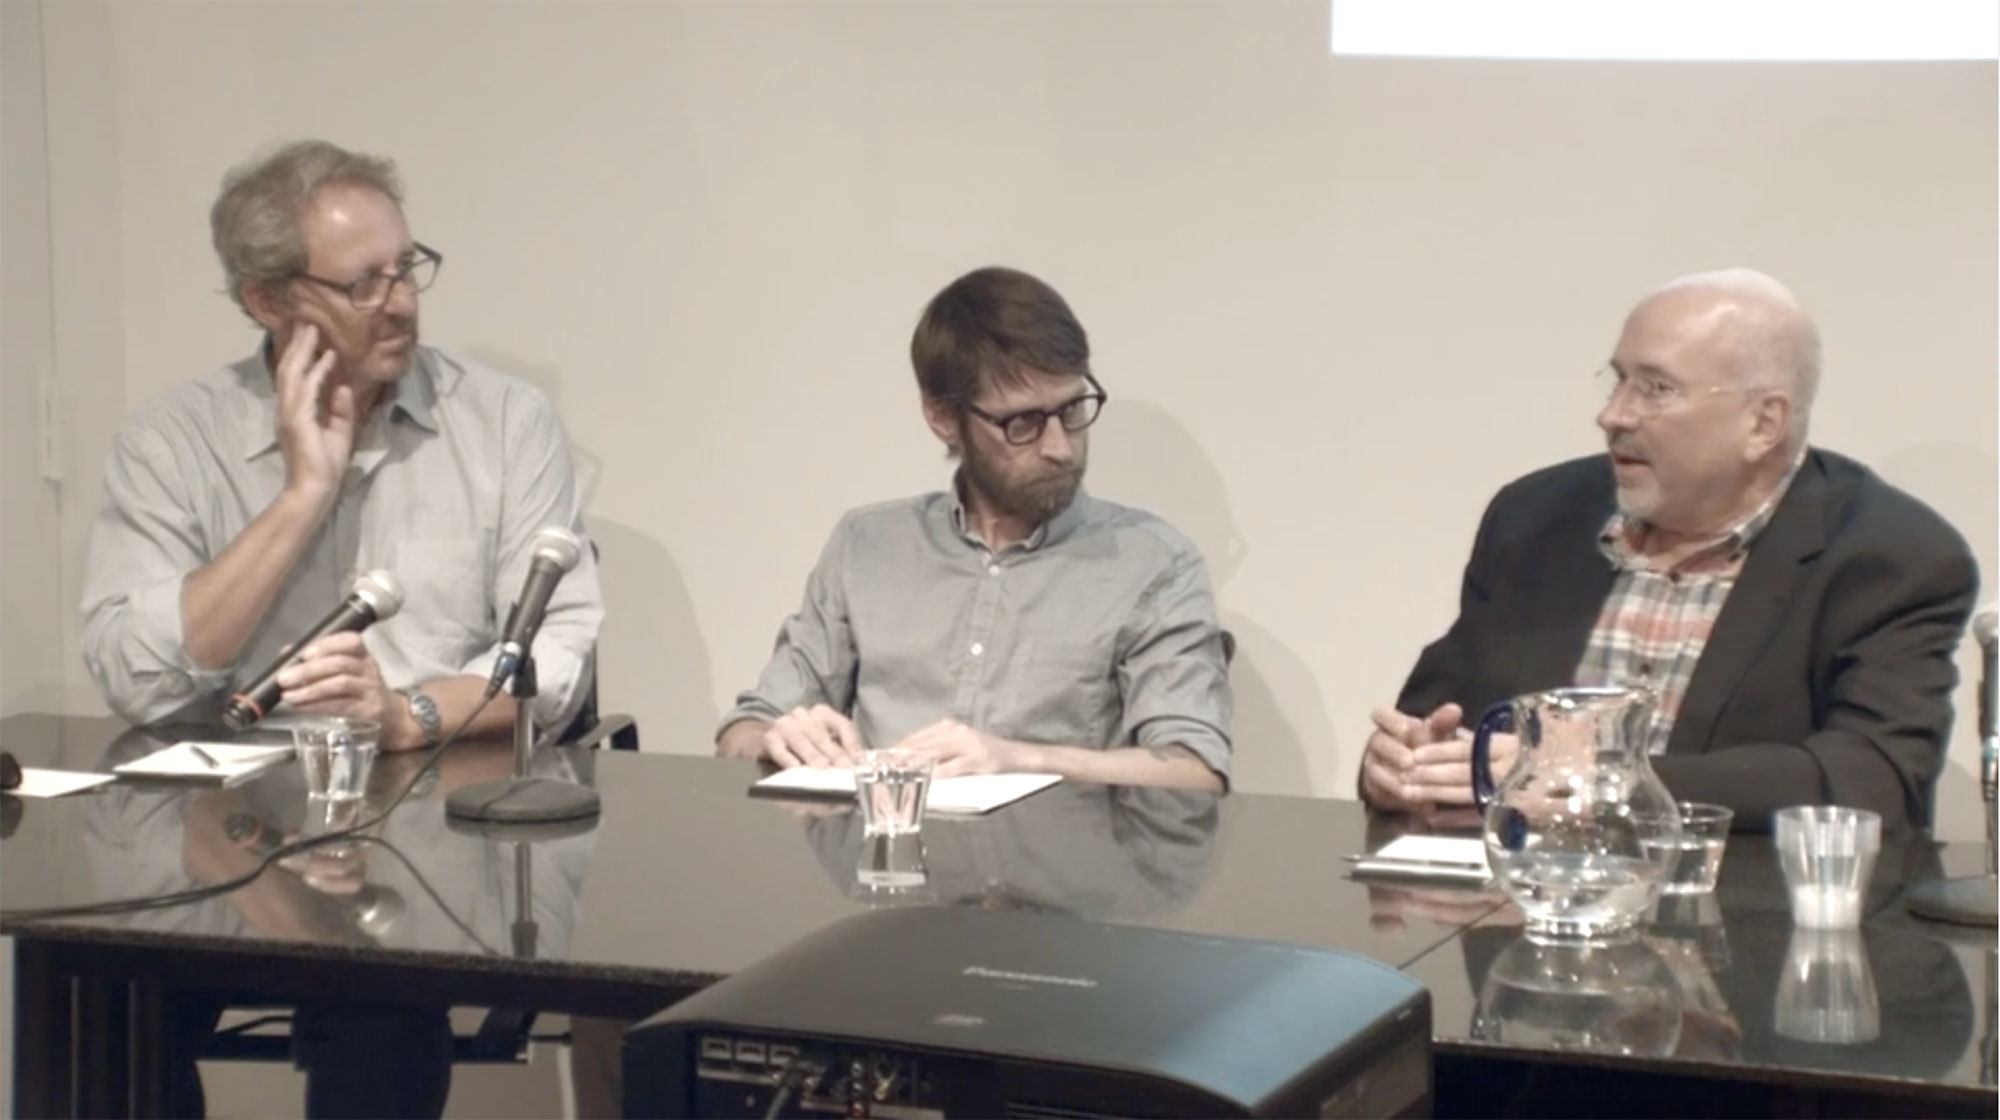 Panel Discussion - Conservation: Robert Gober, 2015